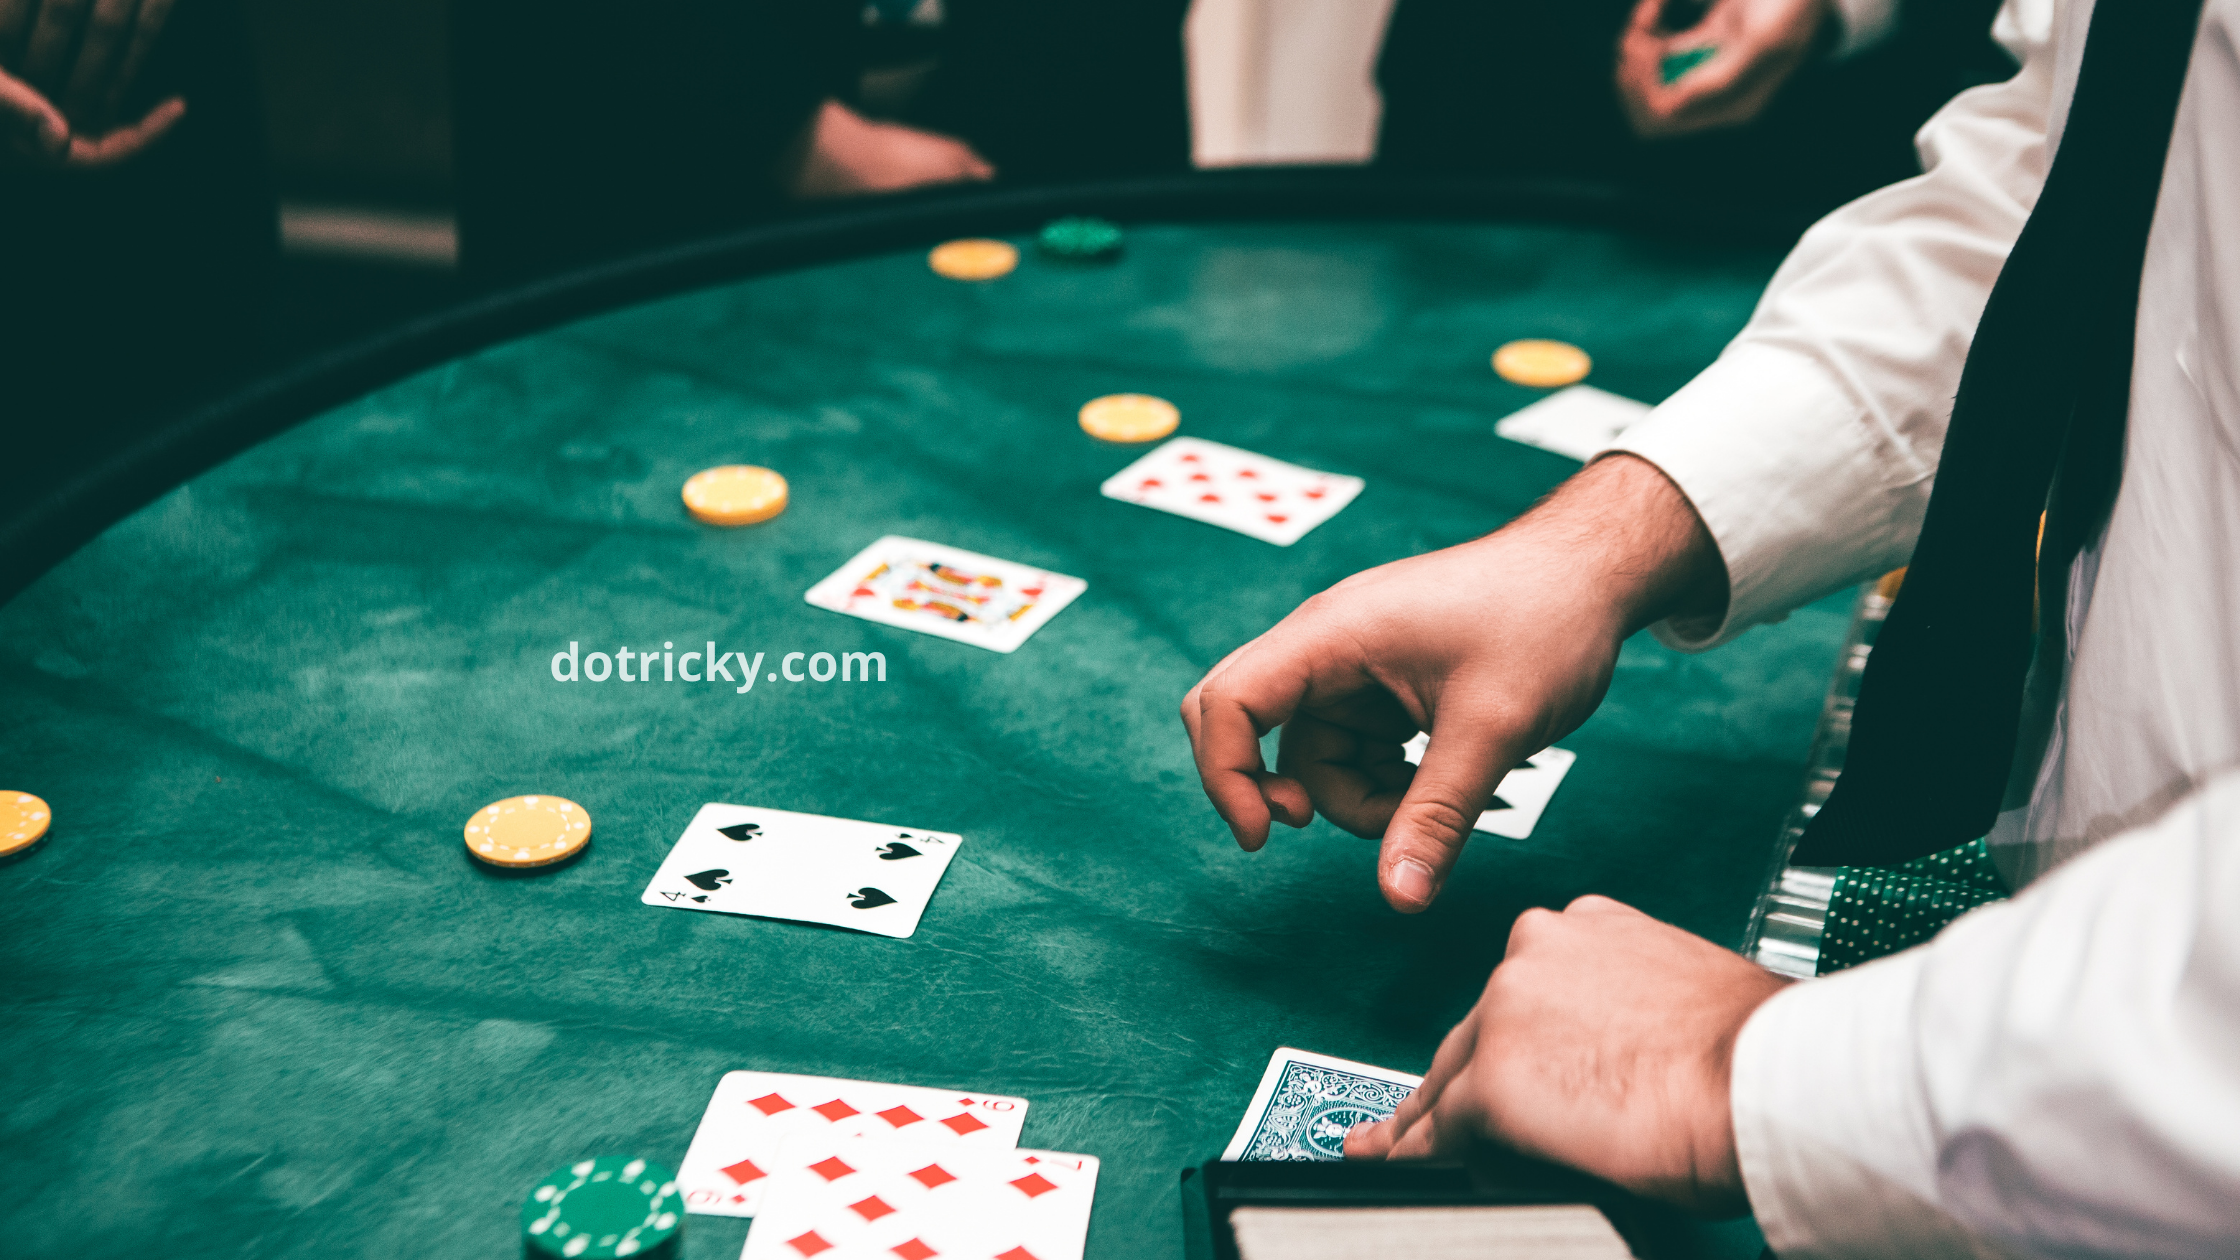 The Easiest Casino Games To Win